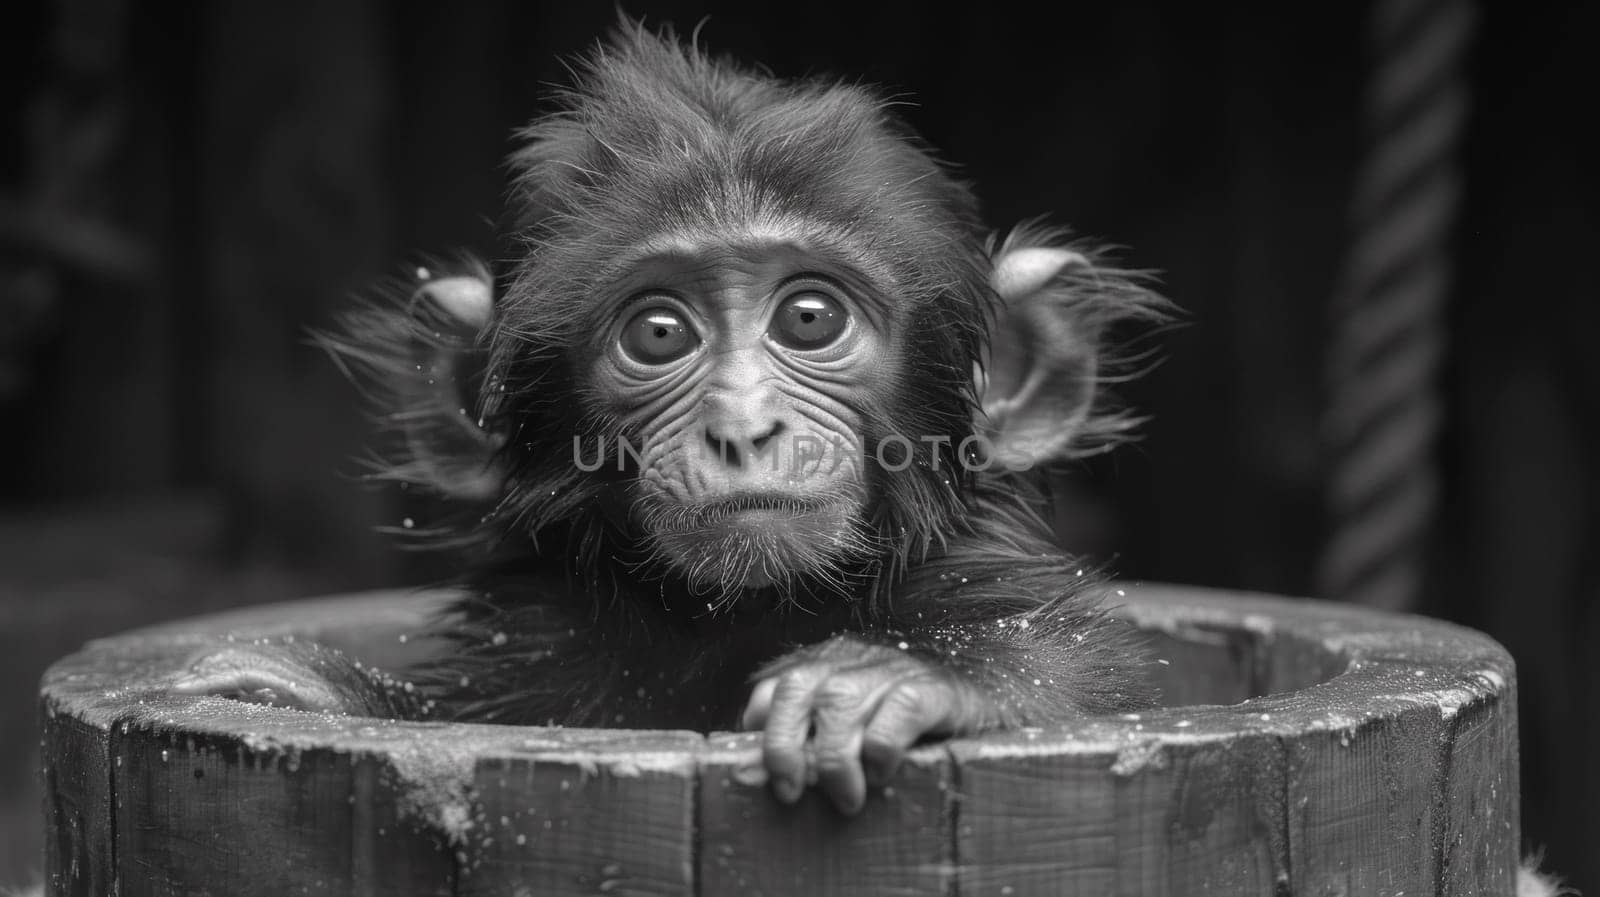 A baby monkey sitting in a wooden barrel with water